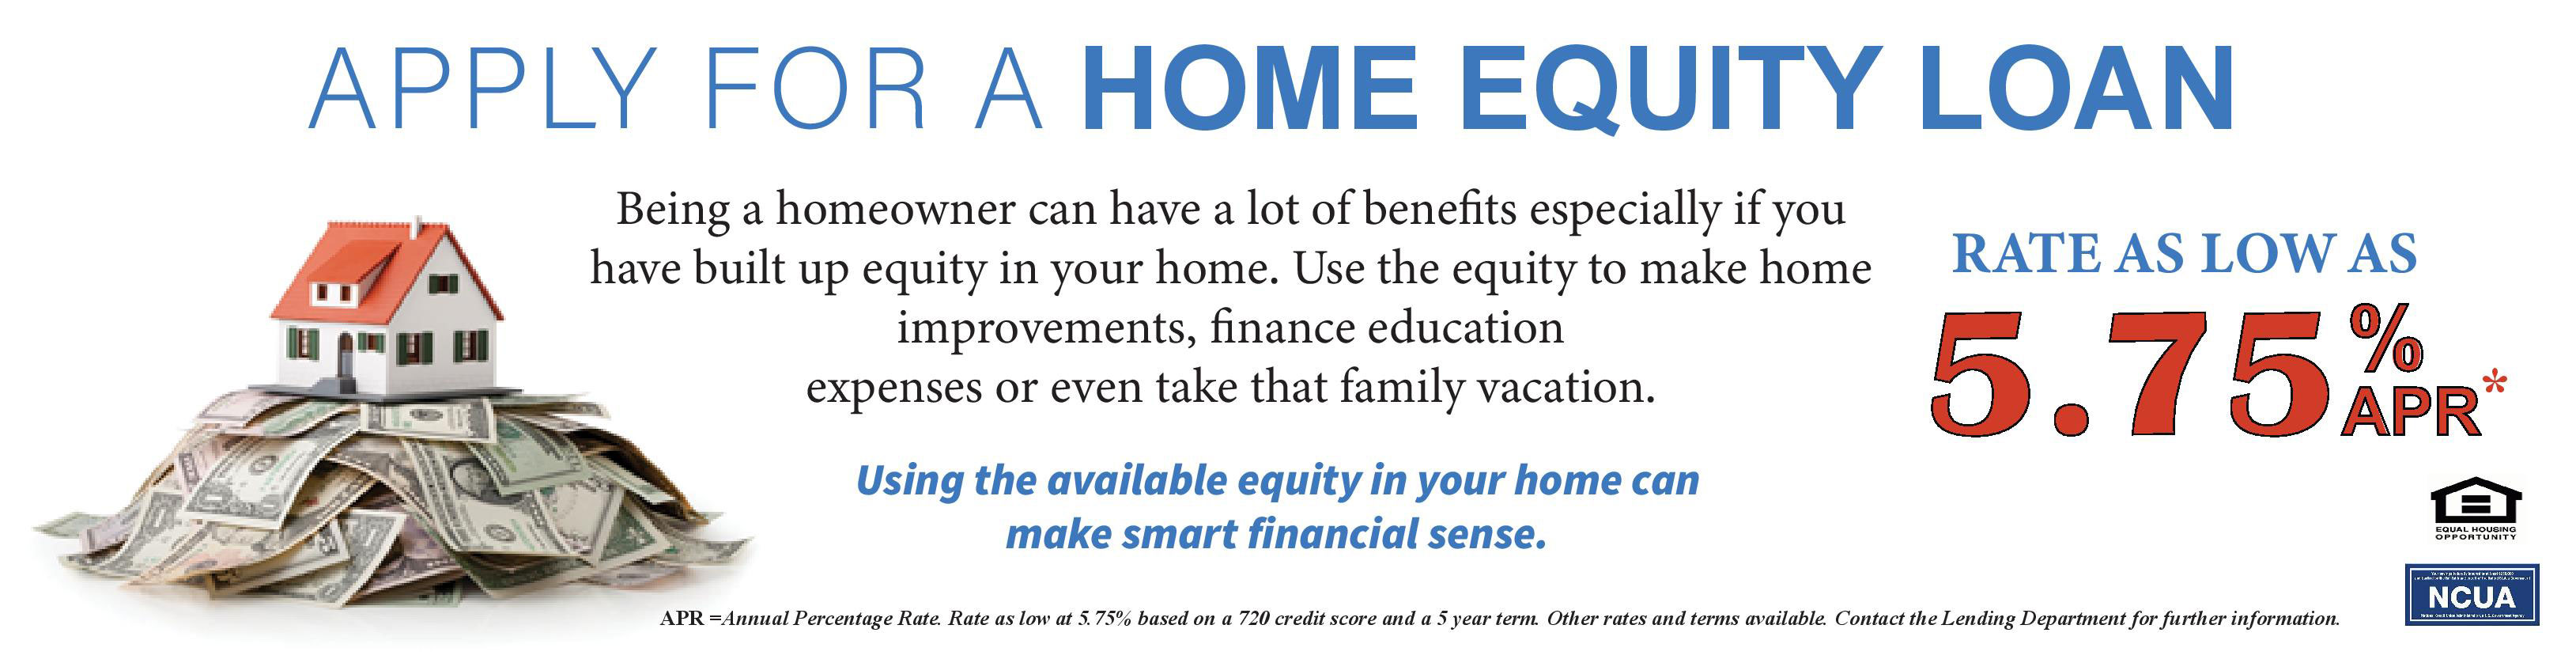 Apply for a home equity loan. Rates as low as 5.75% apr